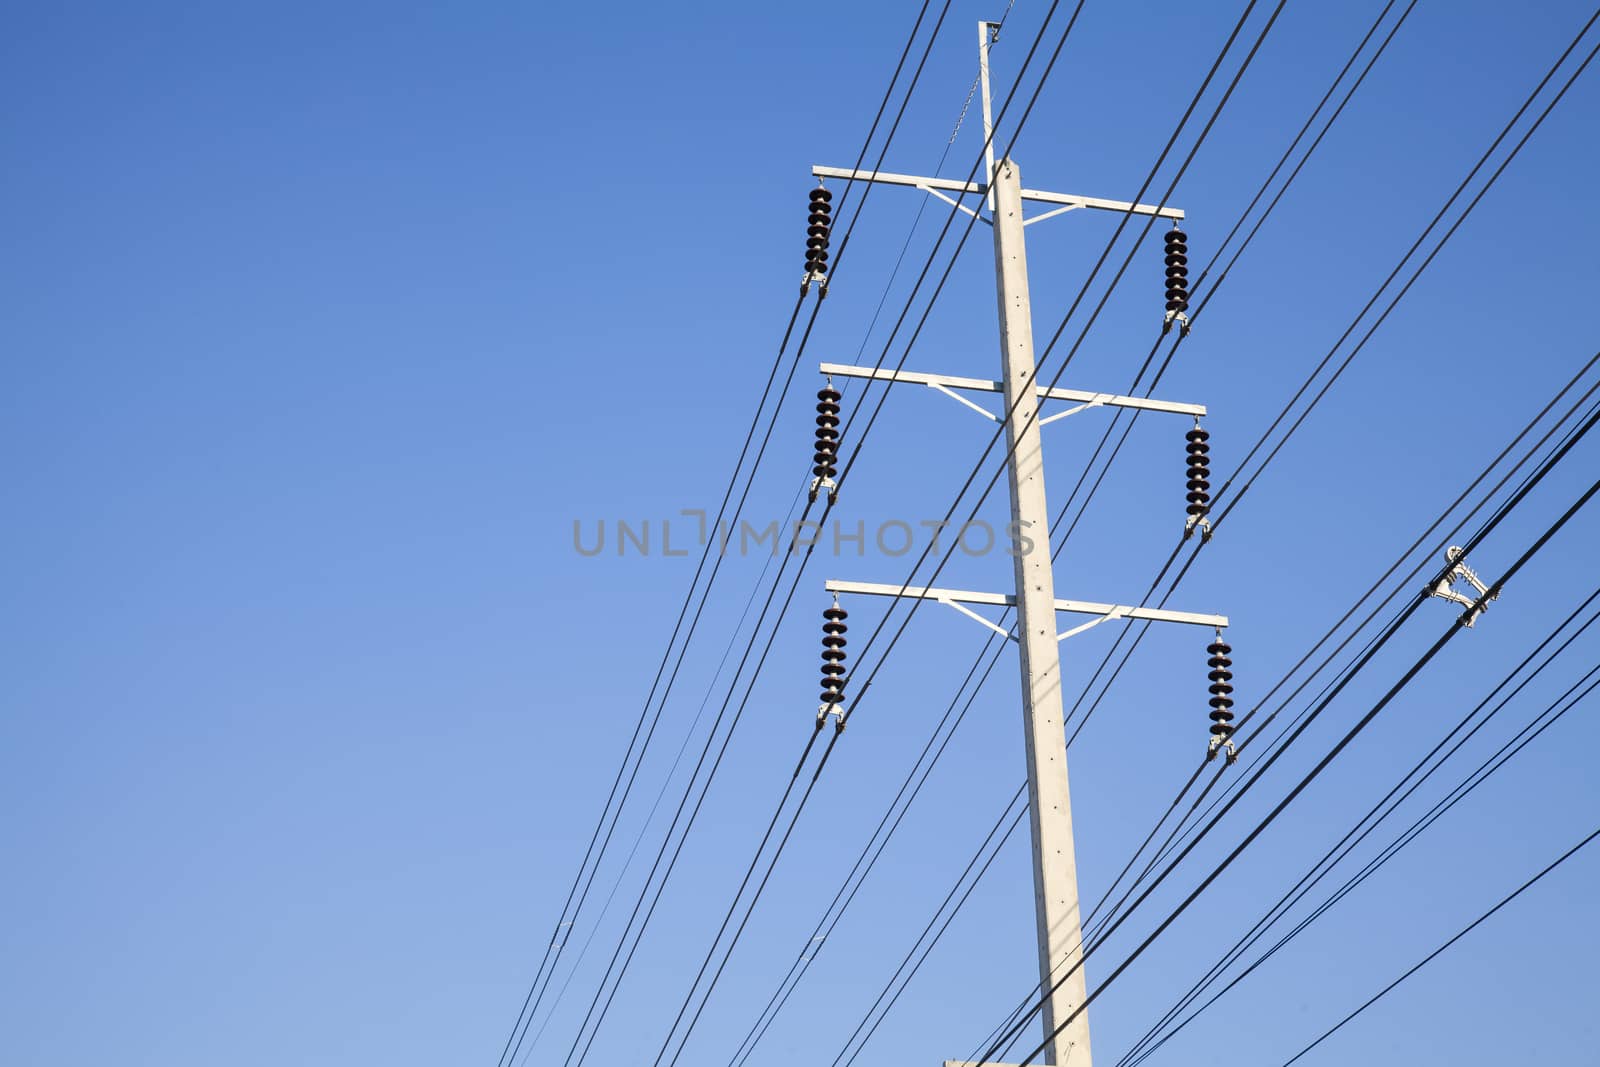  Electrical power poles in The electricity needed to power an el by jee1999